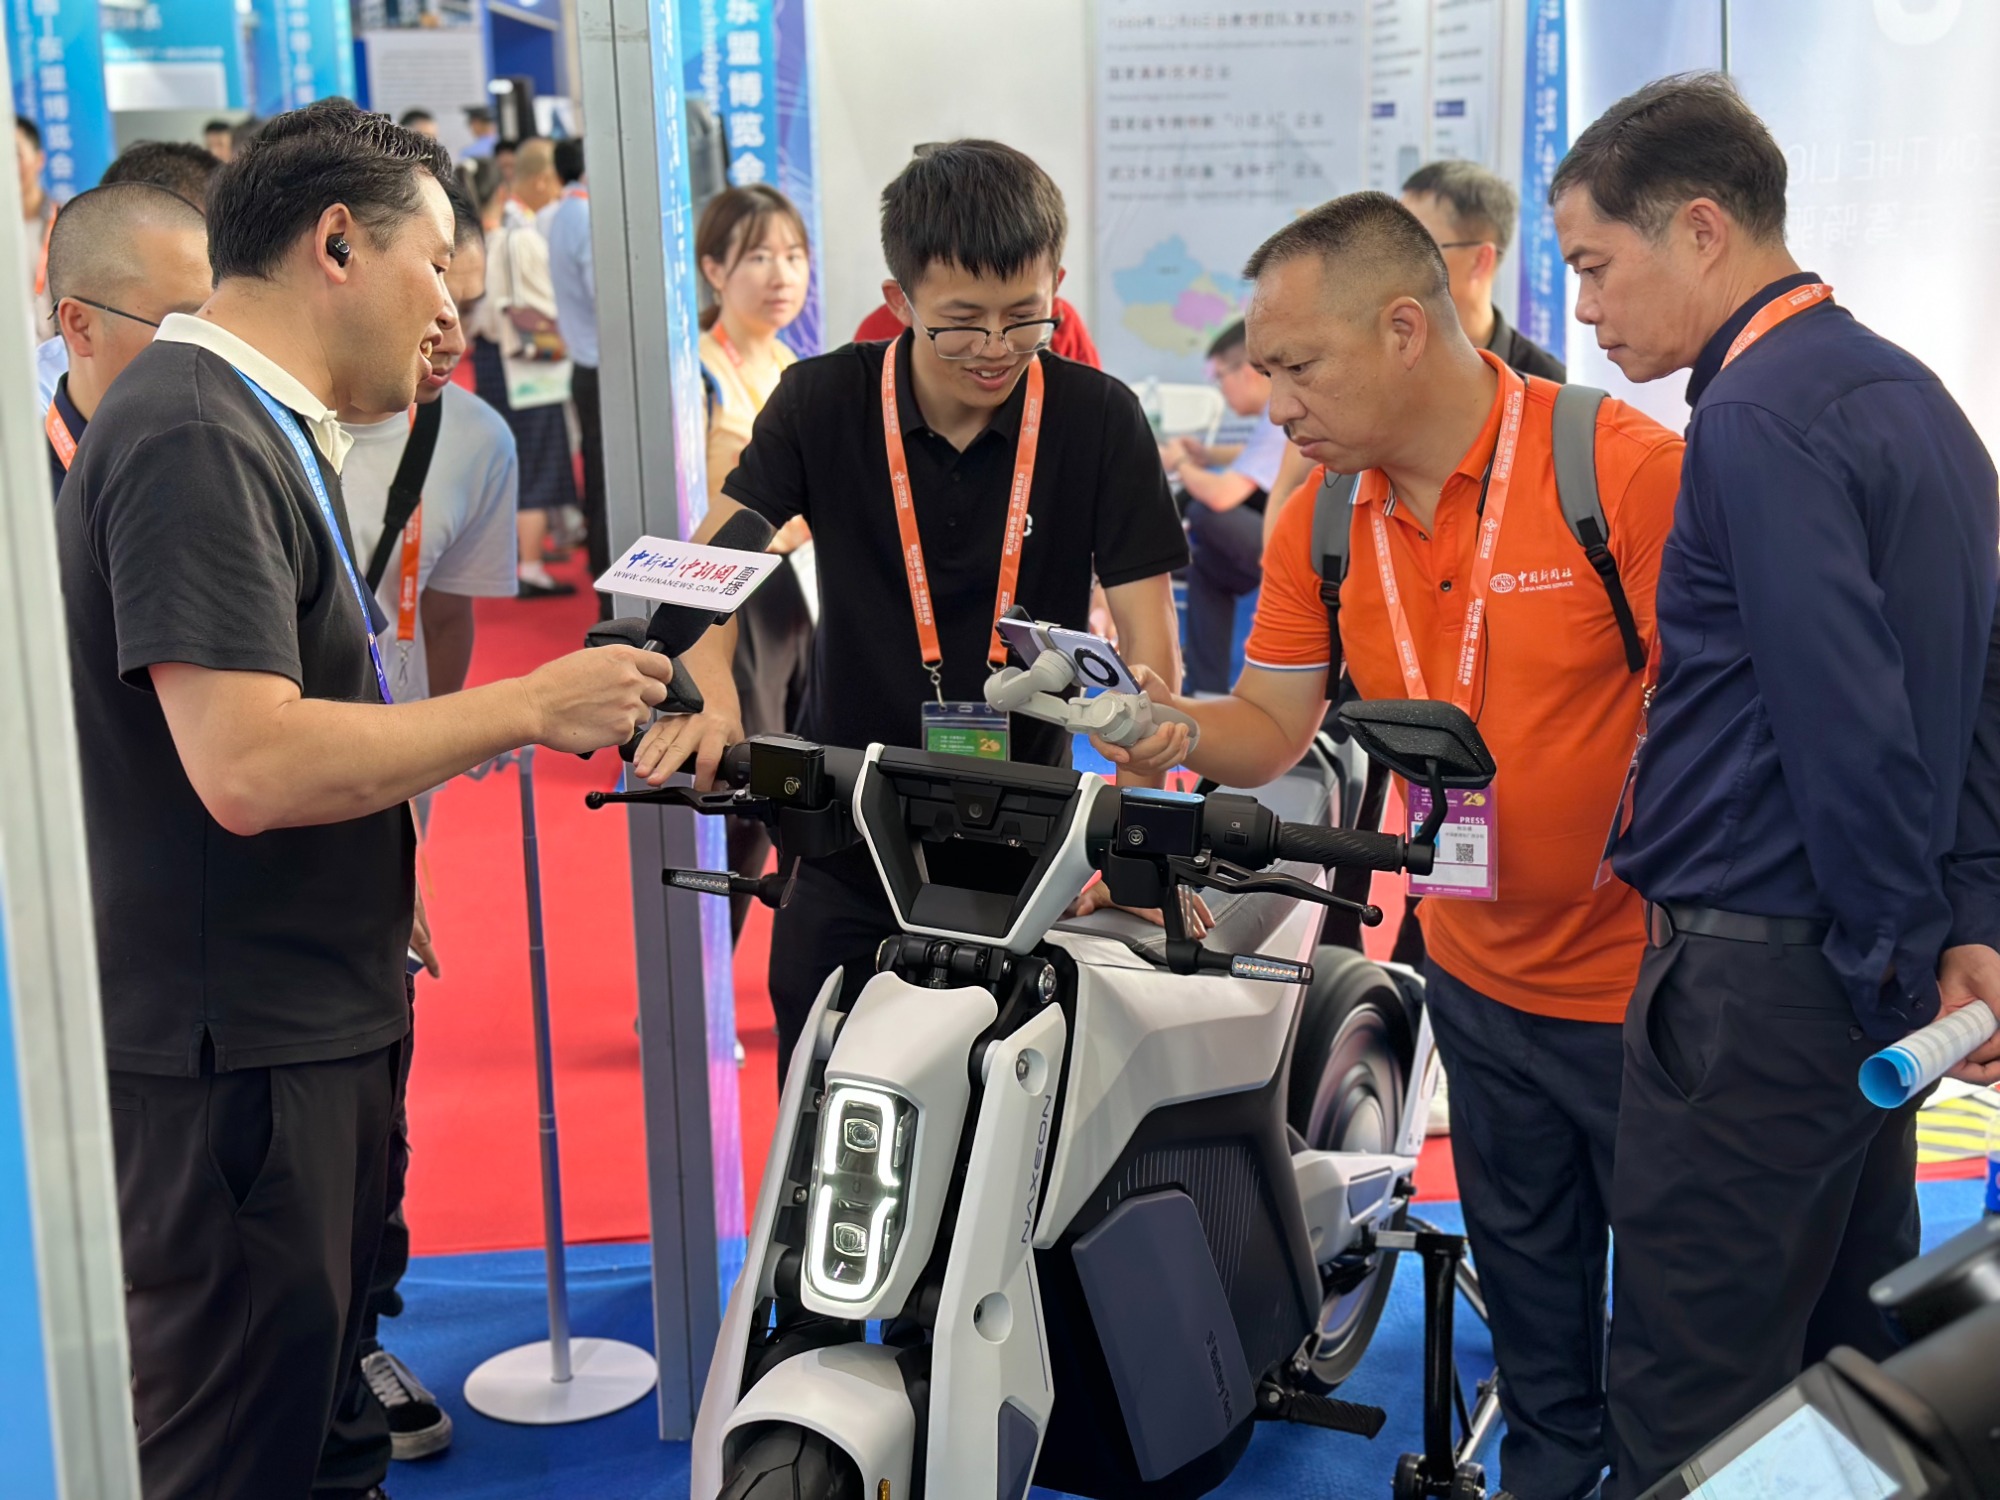 NAXEON Unveils Electric Vehicle at 20th China-ASEAN Expo